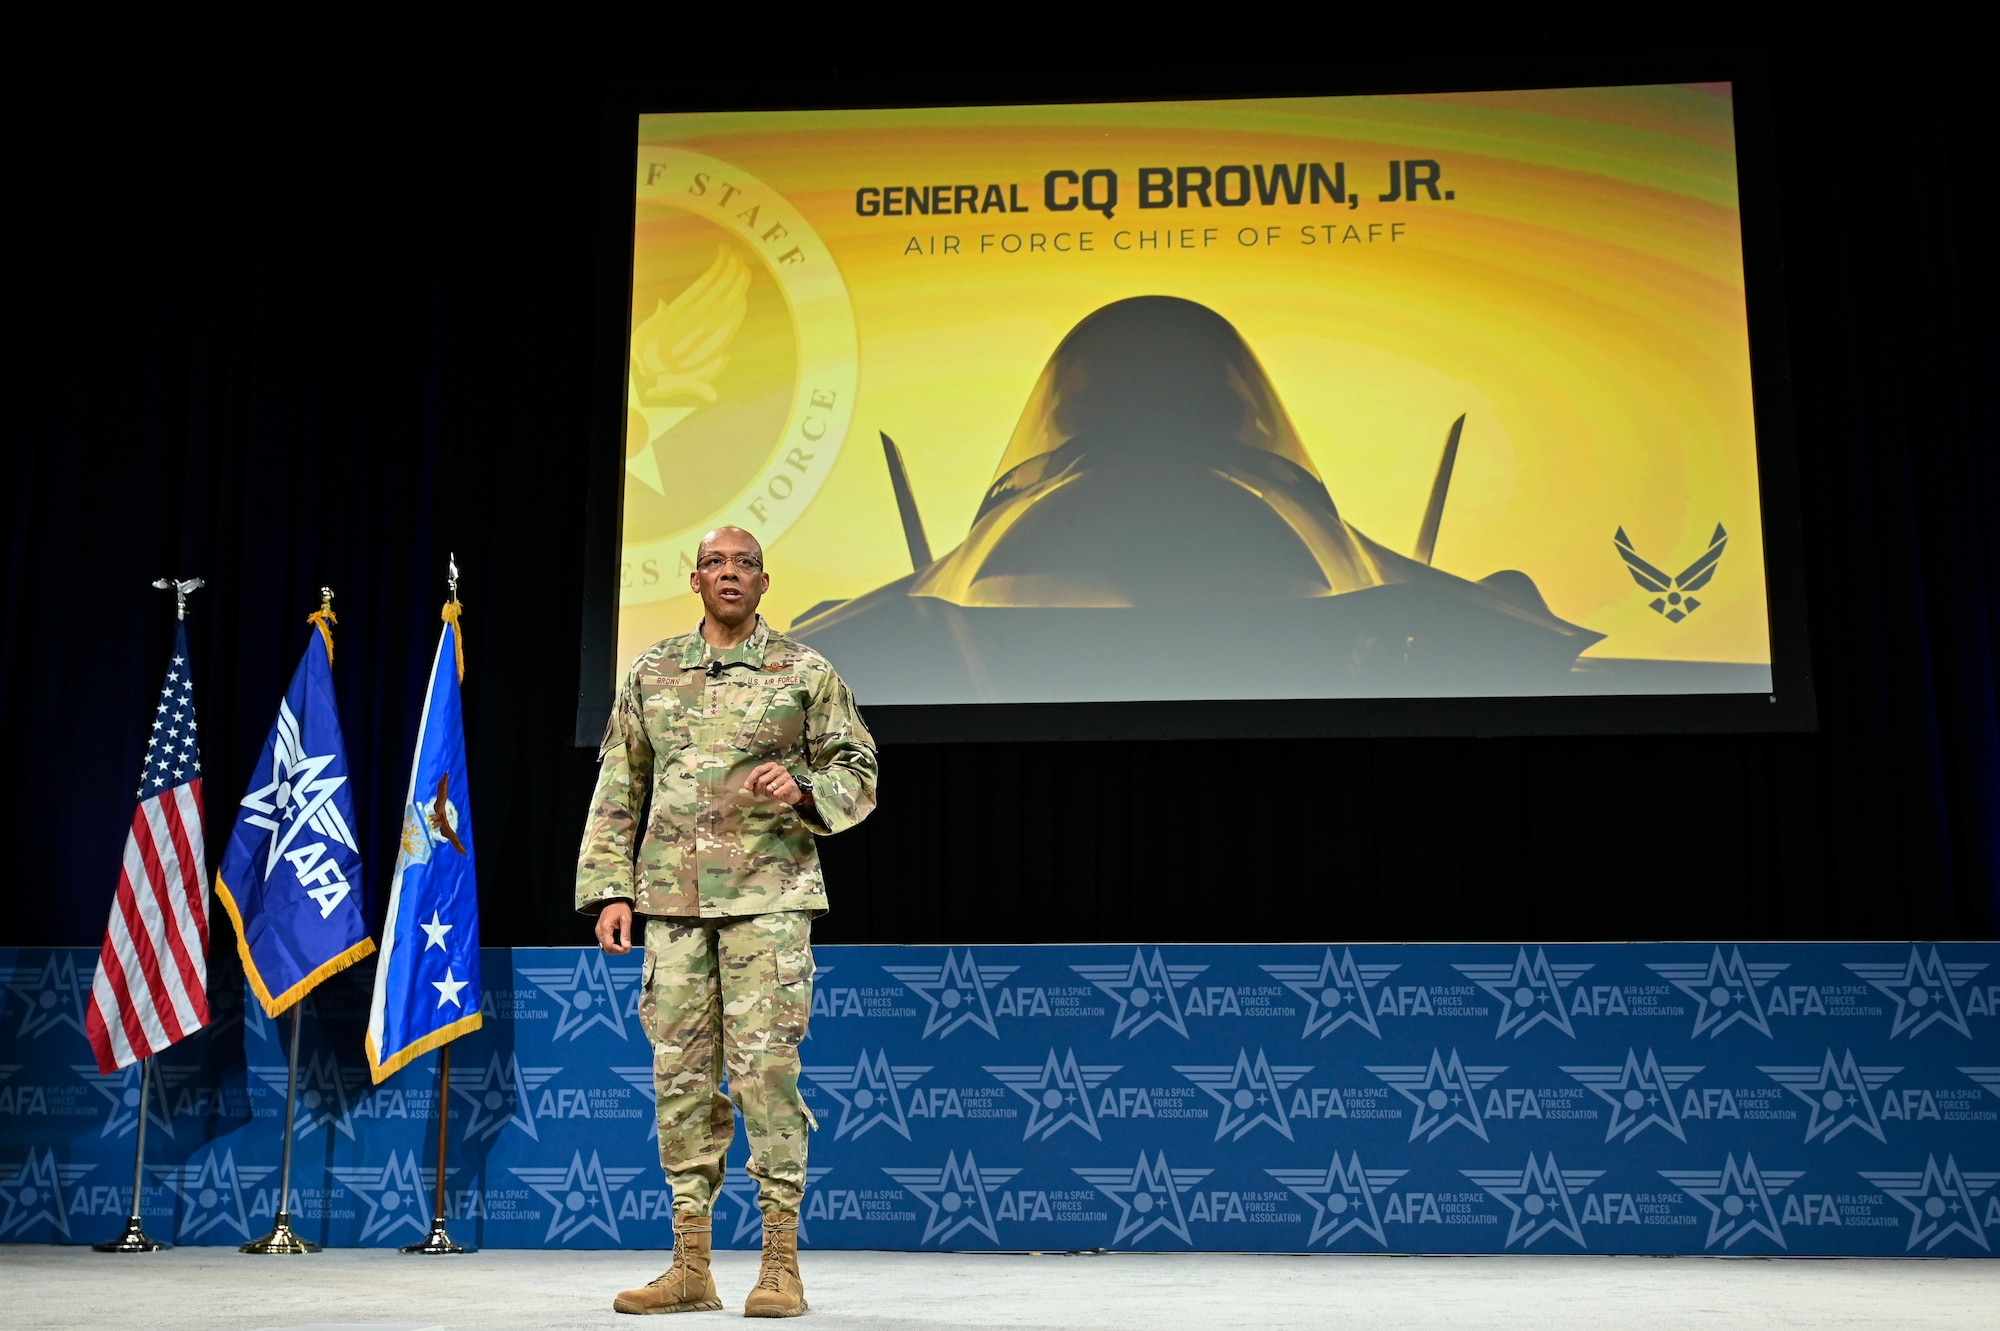 Air Force Chief of Staff Gen. CQ Brown, Jr. delivers a keynote speech “Airmen in the Fight” during the Air and Space Forces Association 2023 Warfare Symposium in Aurora, Colo., March 7, 2023. (U.S. Air Force photo by Eric Dietrich)